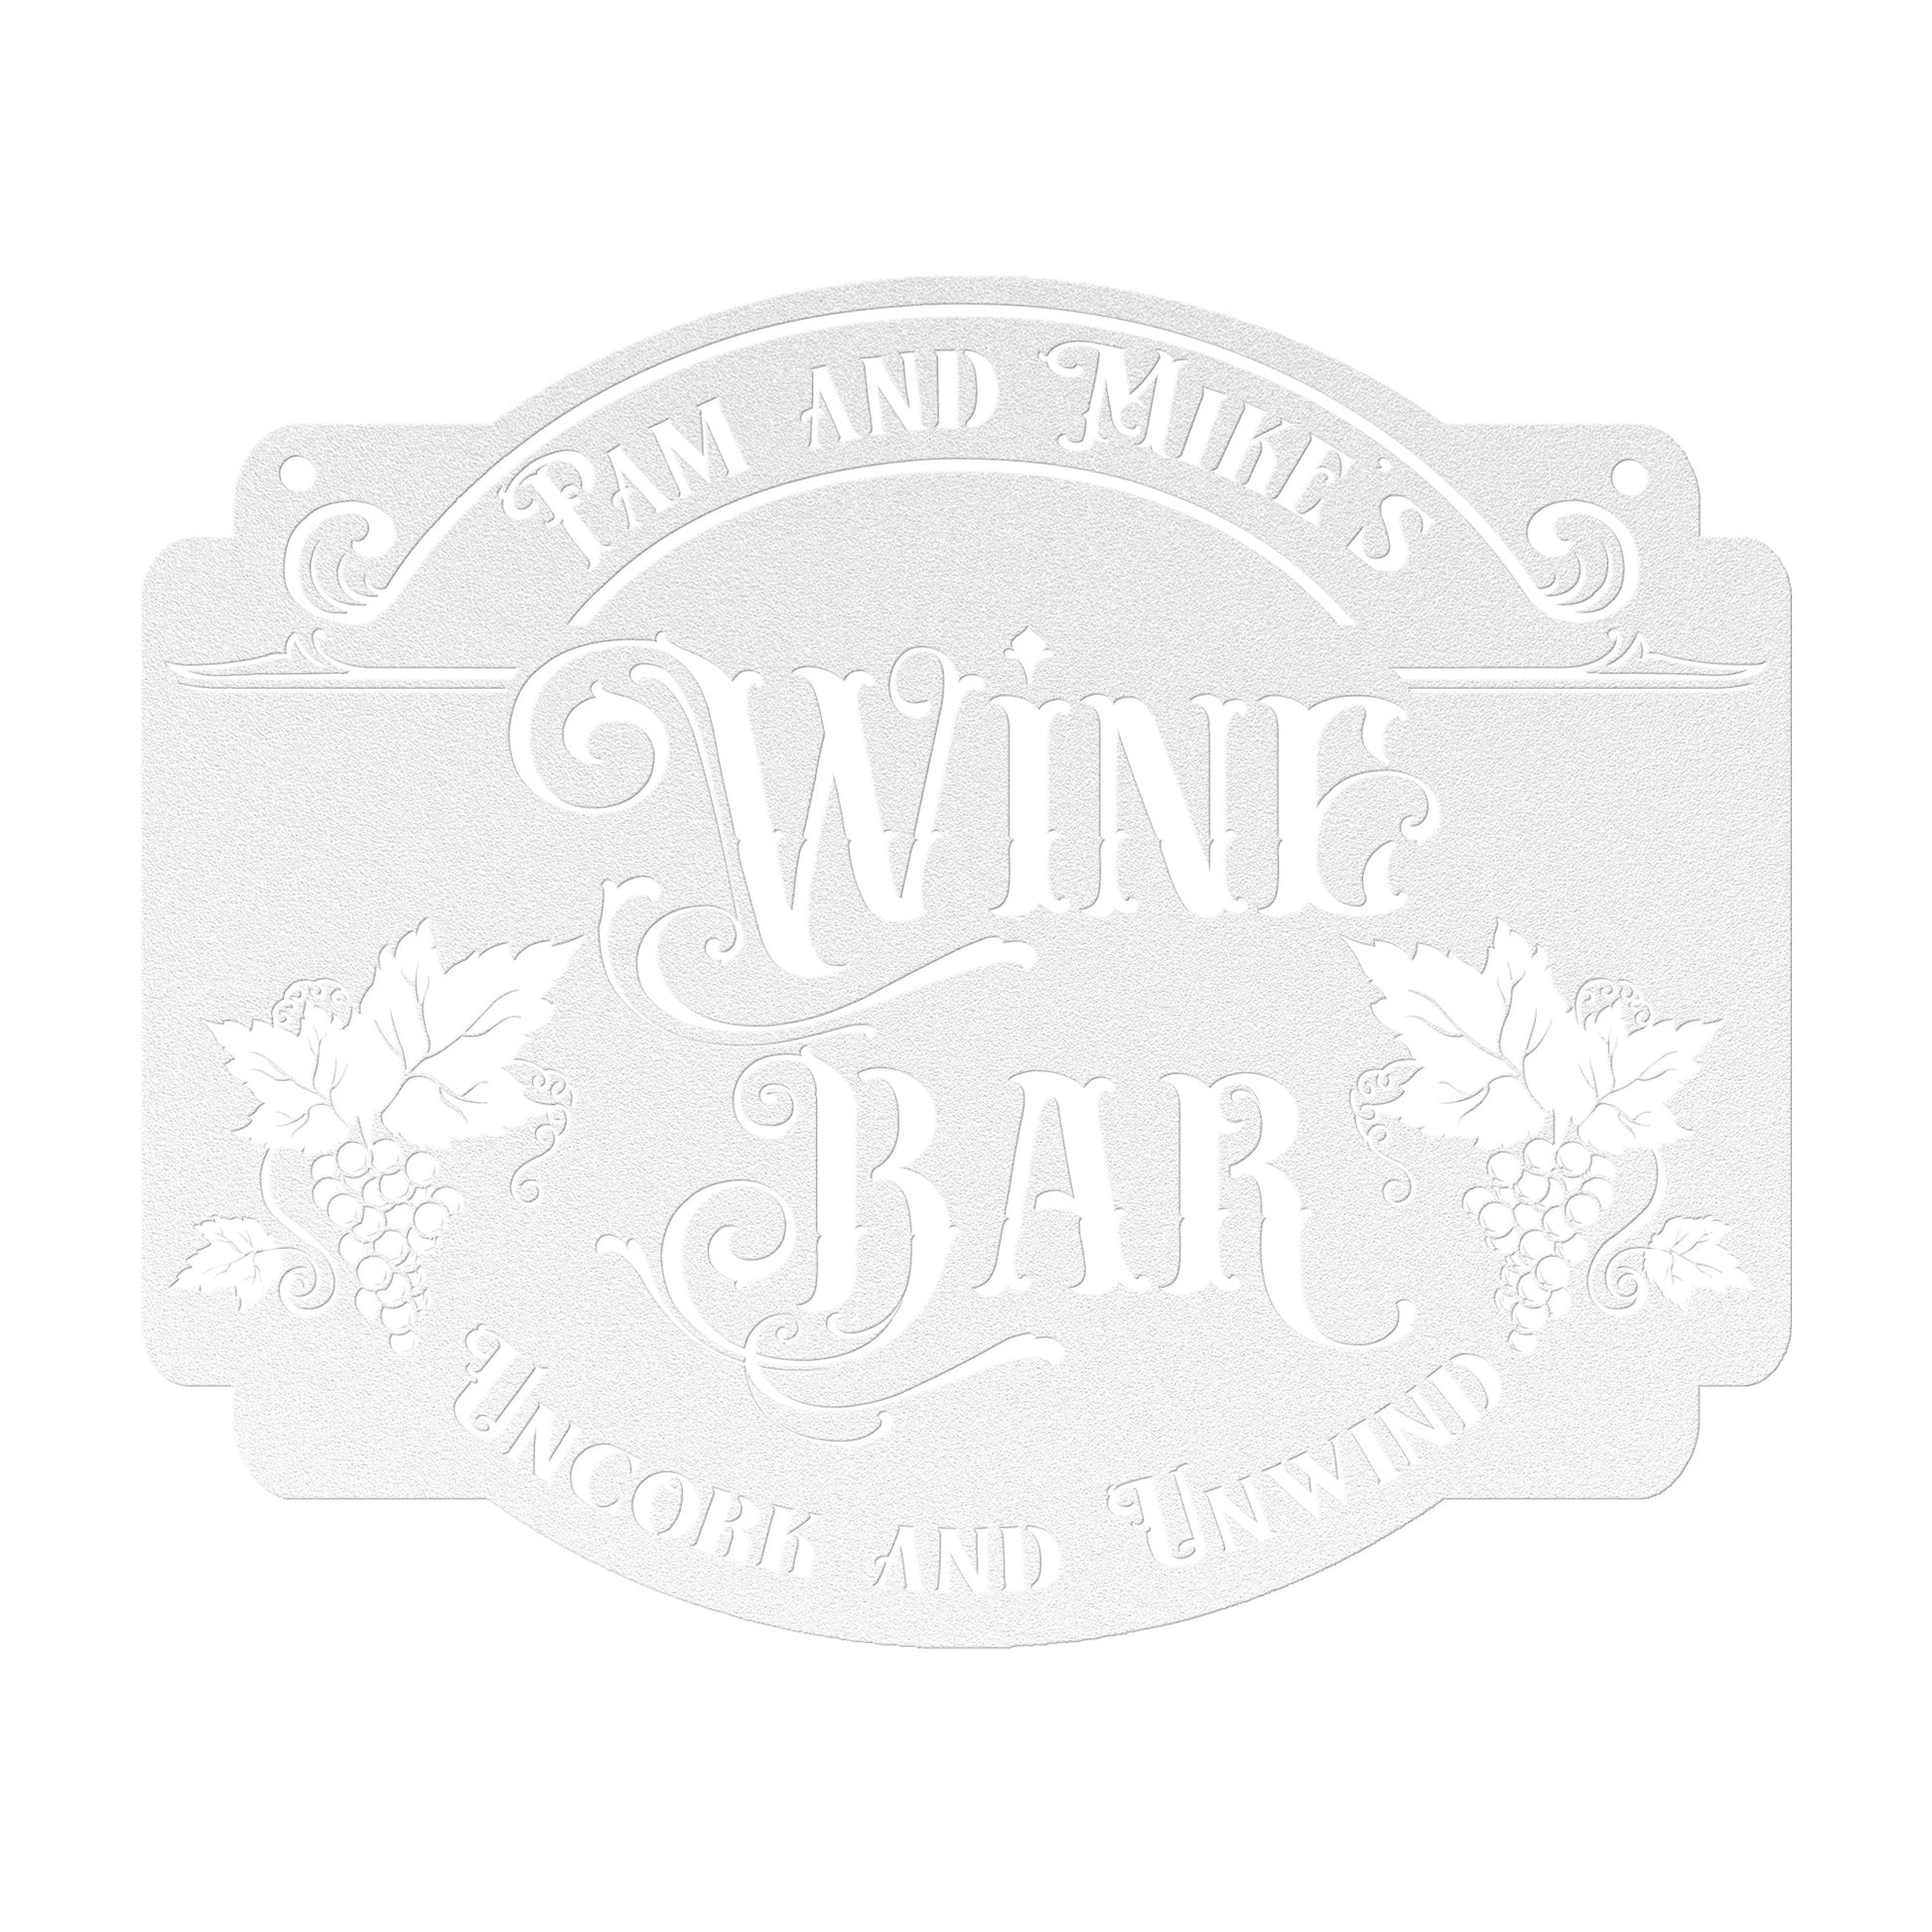 Wine Bar Personalized Metal Sign teelaunch